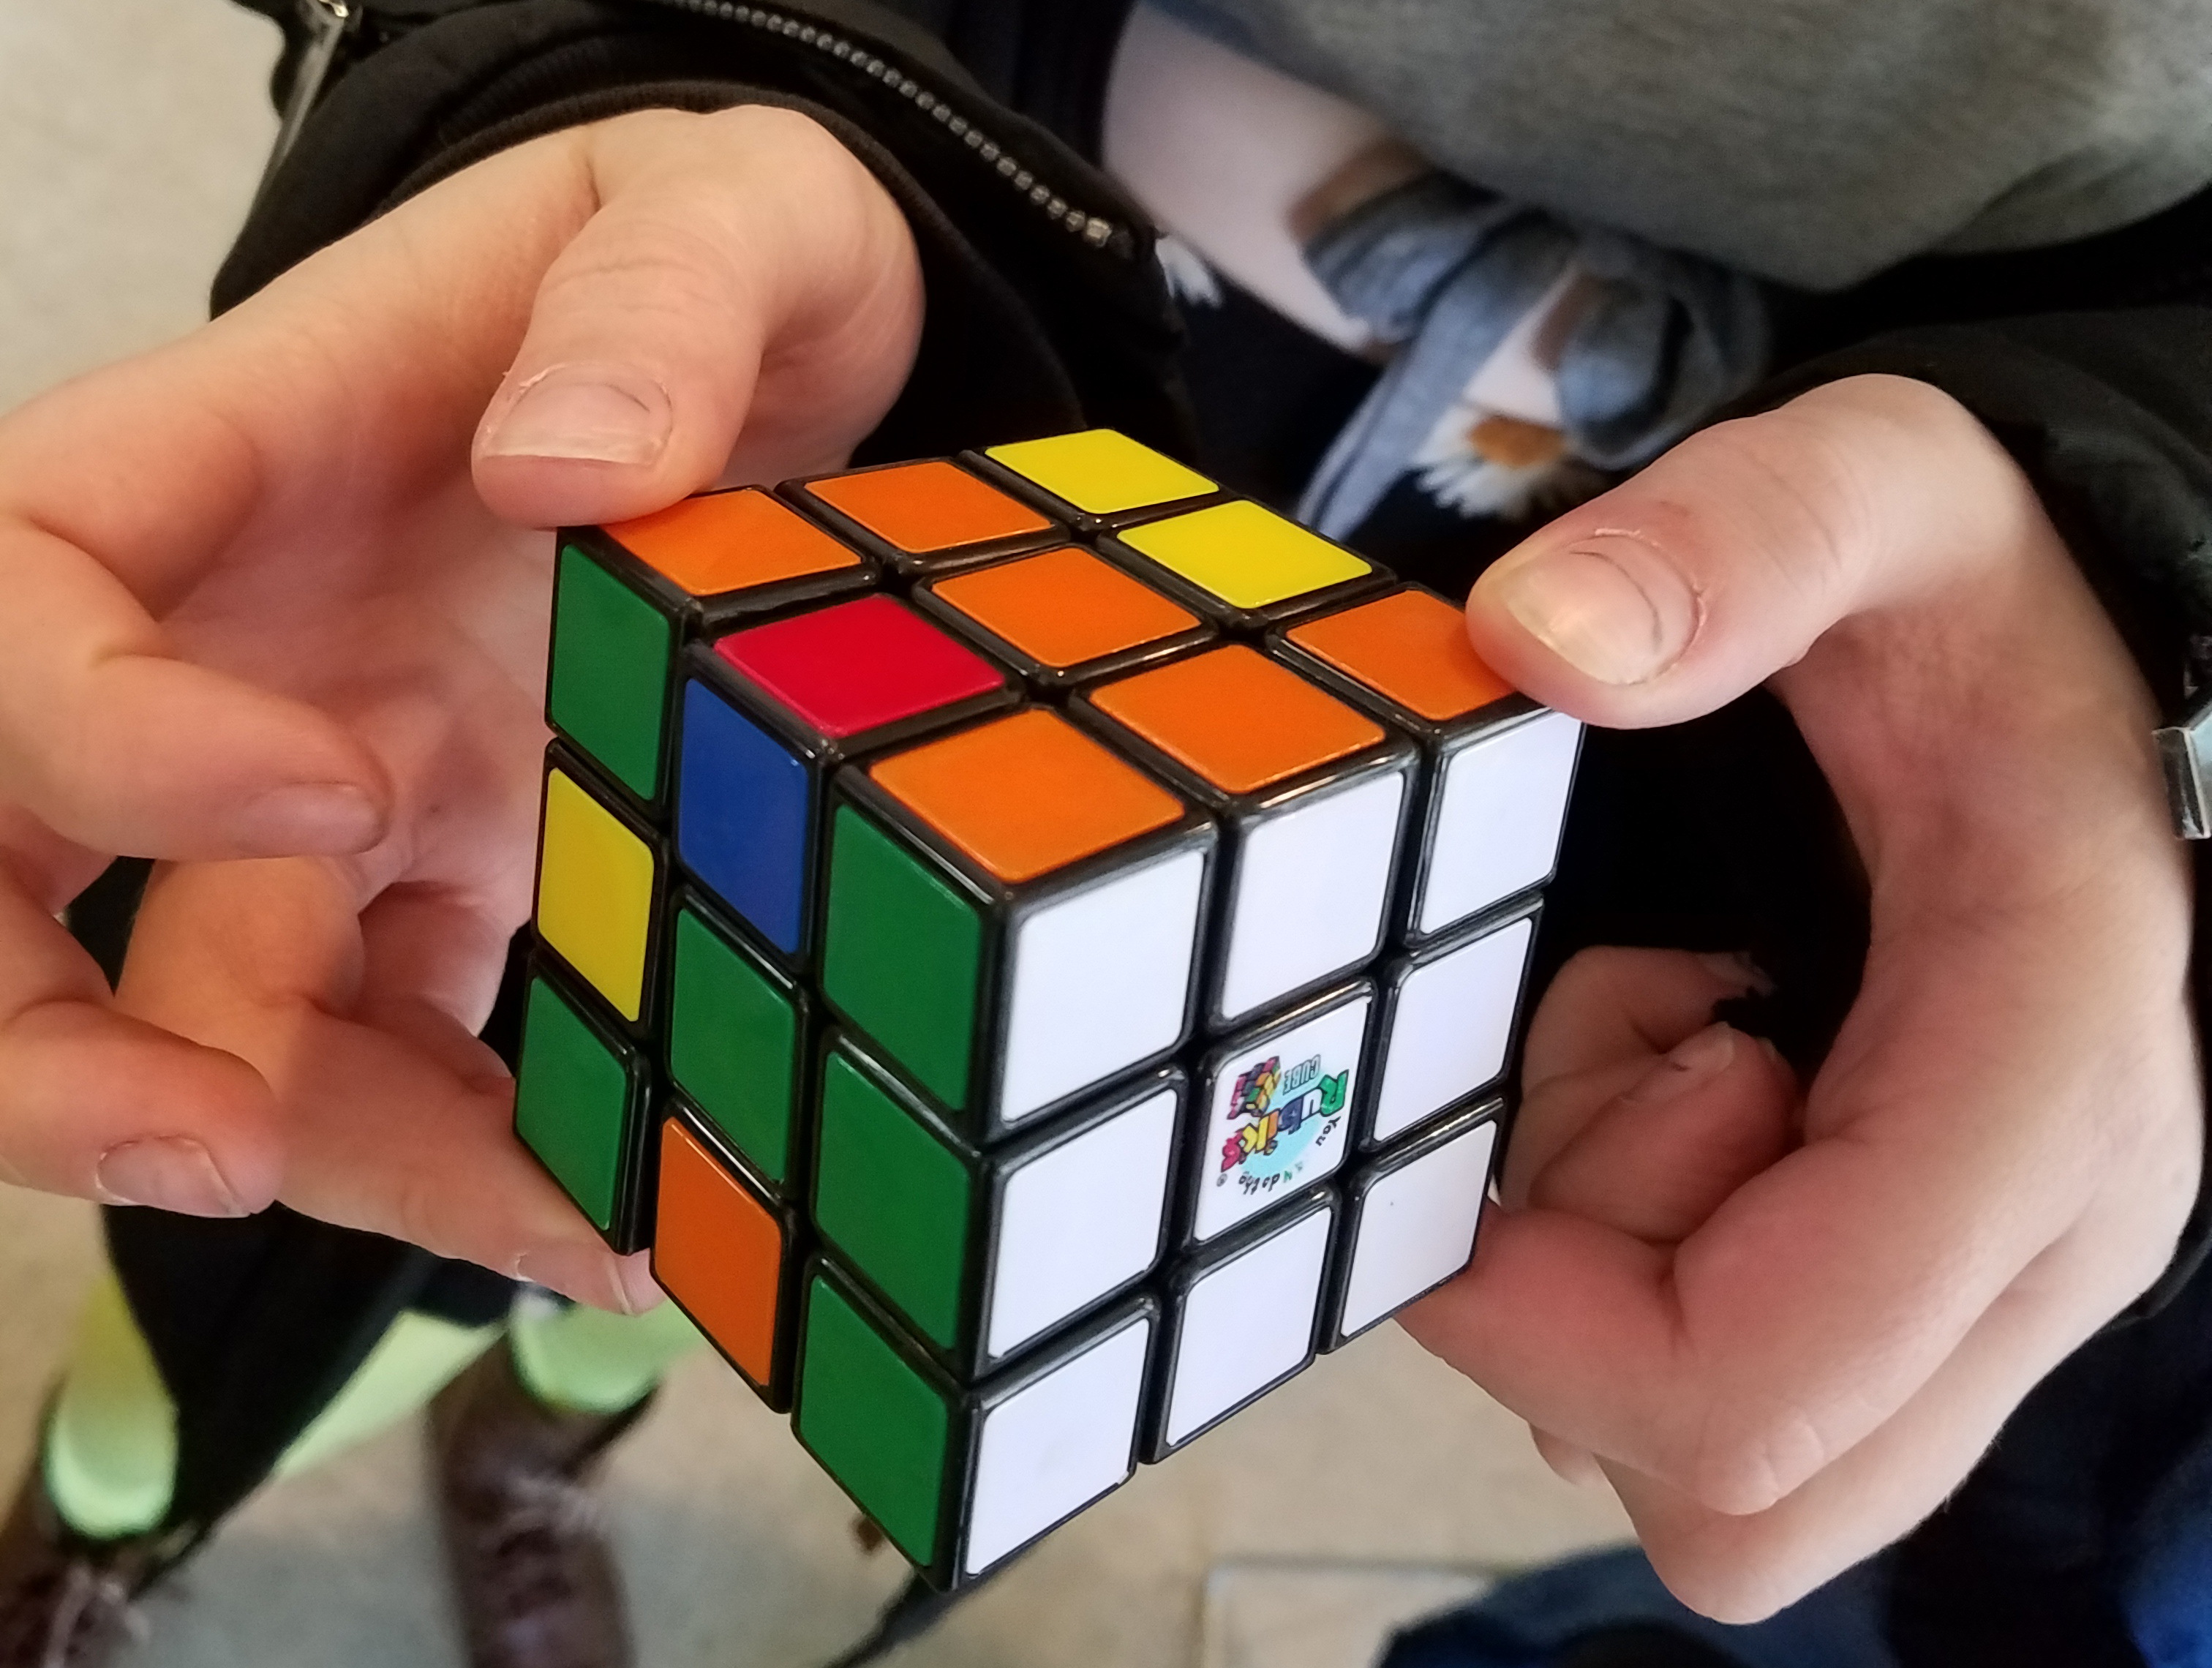 Rubik's Coach Cube, Learn to Solve 3x3 Cube with Stickers, Guide